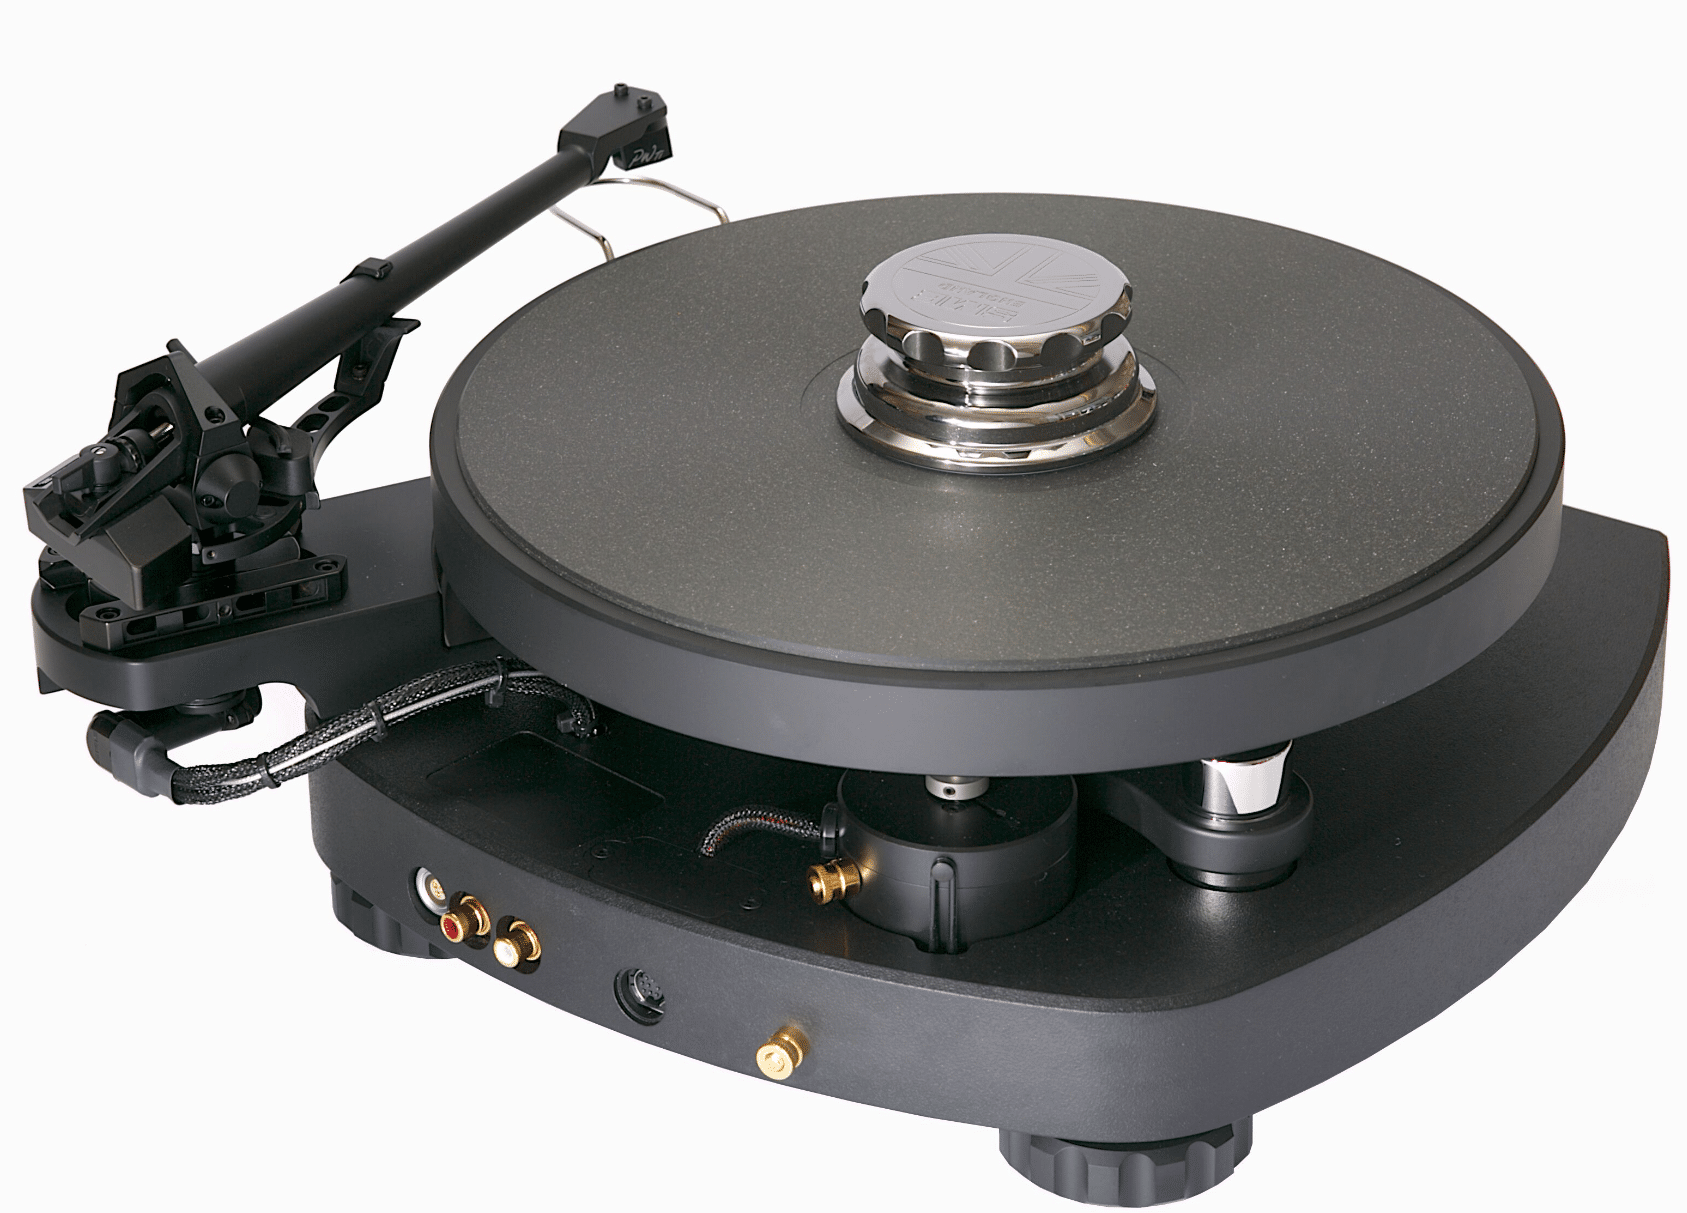 Synergy integrated turntable From SME